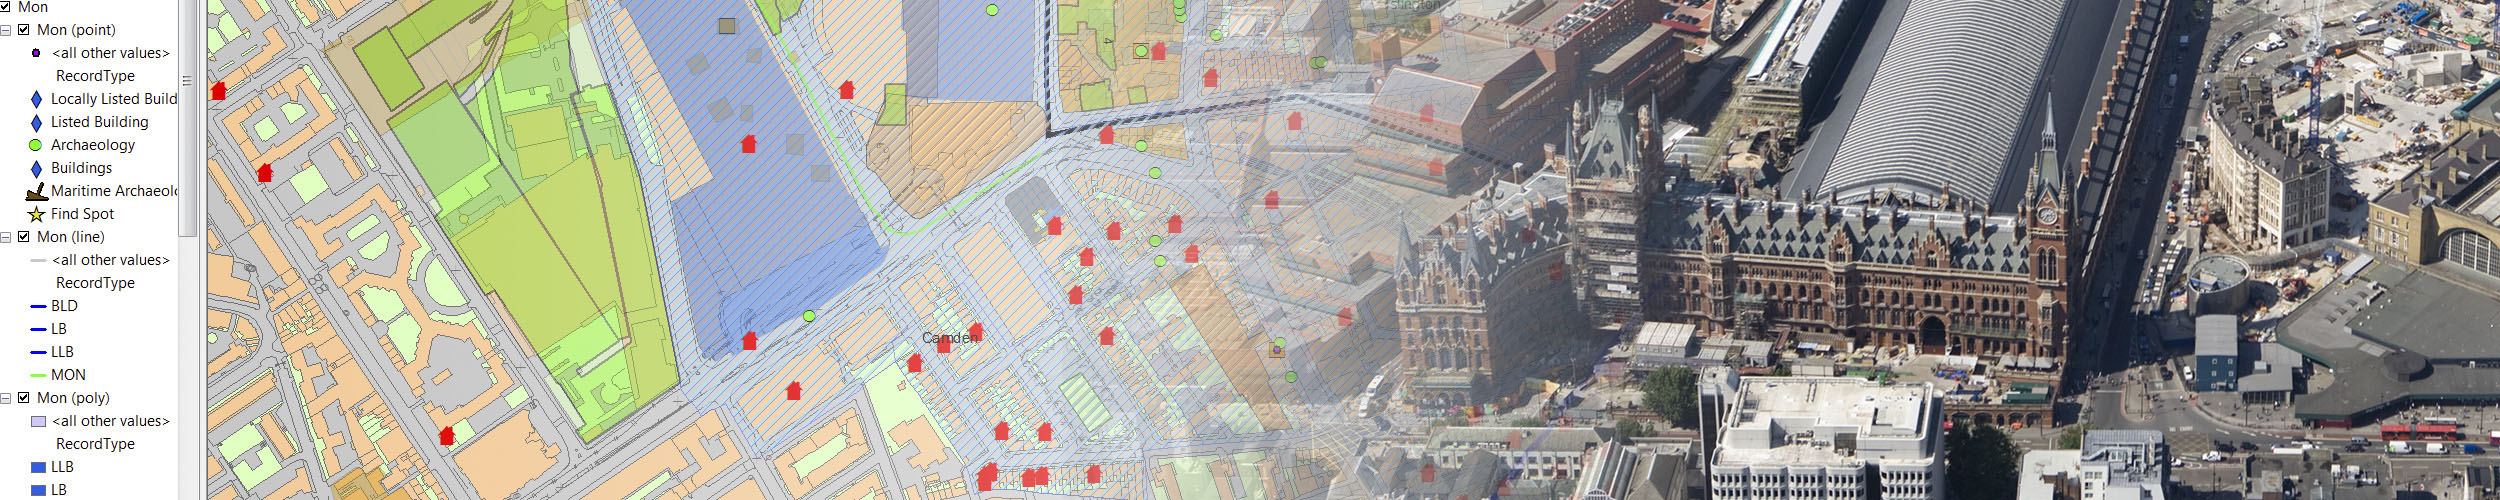 Image of St Pancras Station, with associated computer mapping